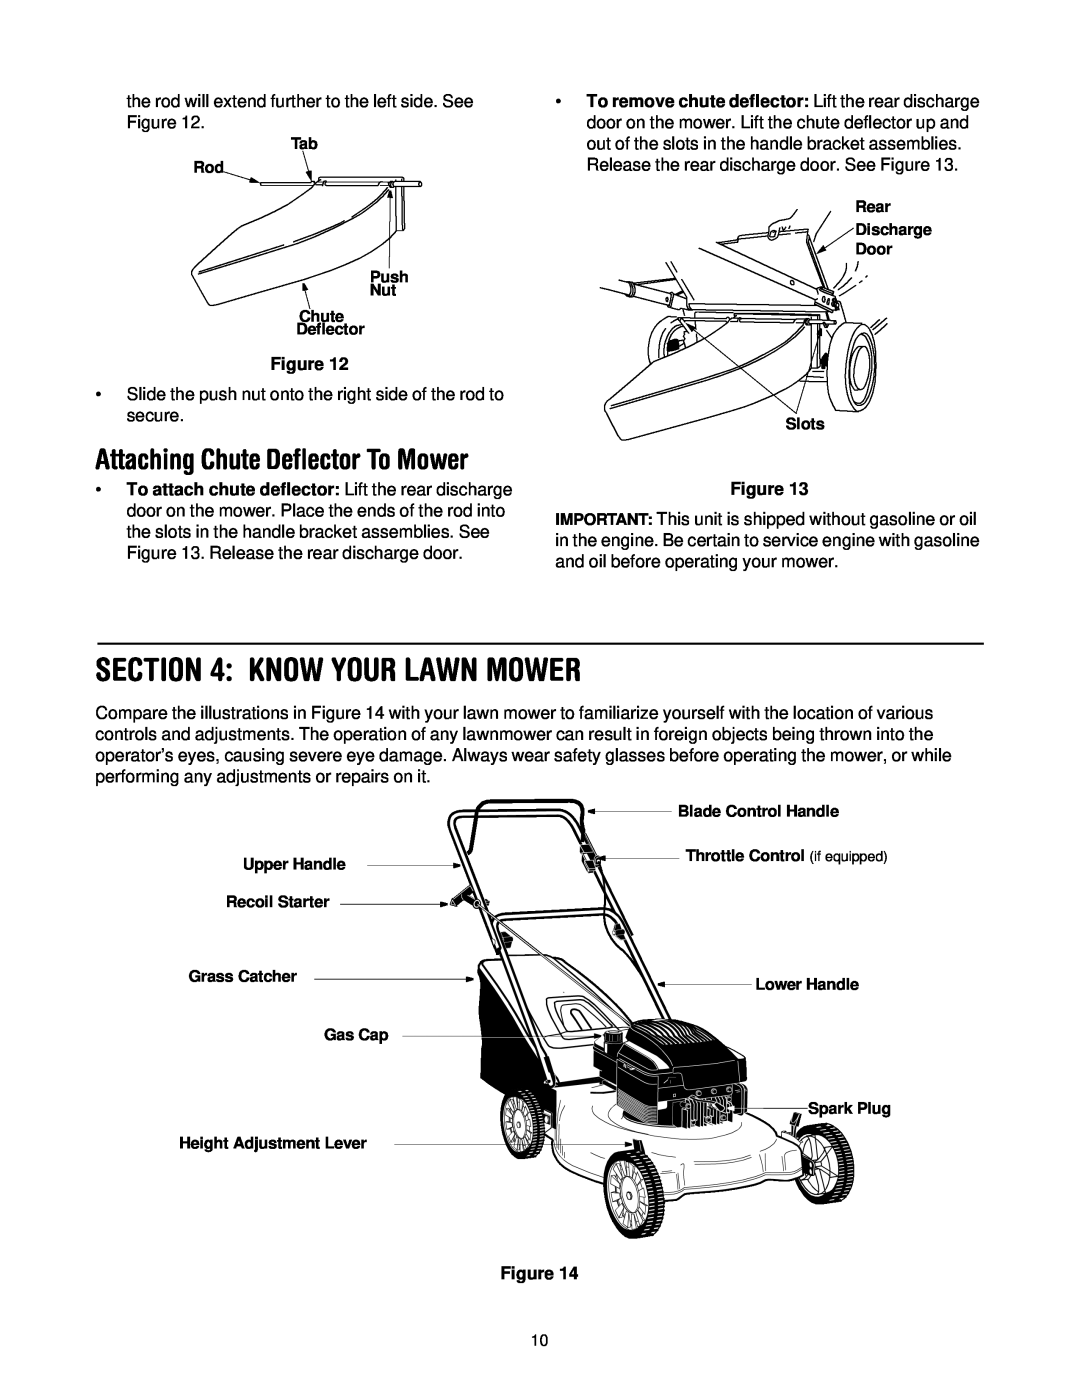 Yard Machines 429 manual Know Your Lawn Mower, Attaching Chute Deflector To Mower 